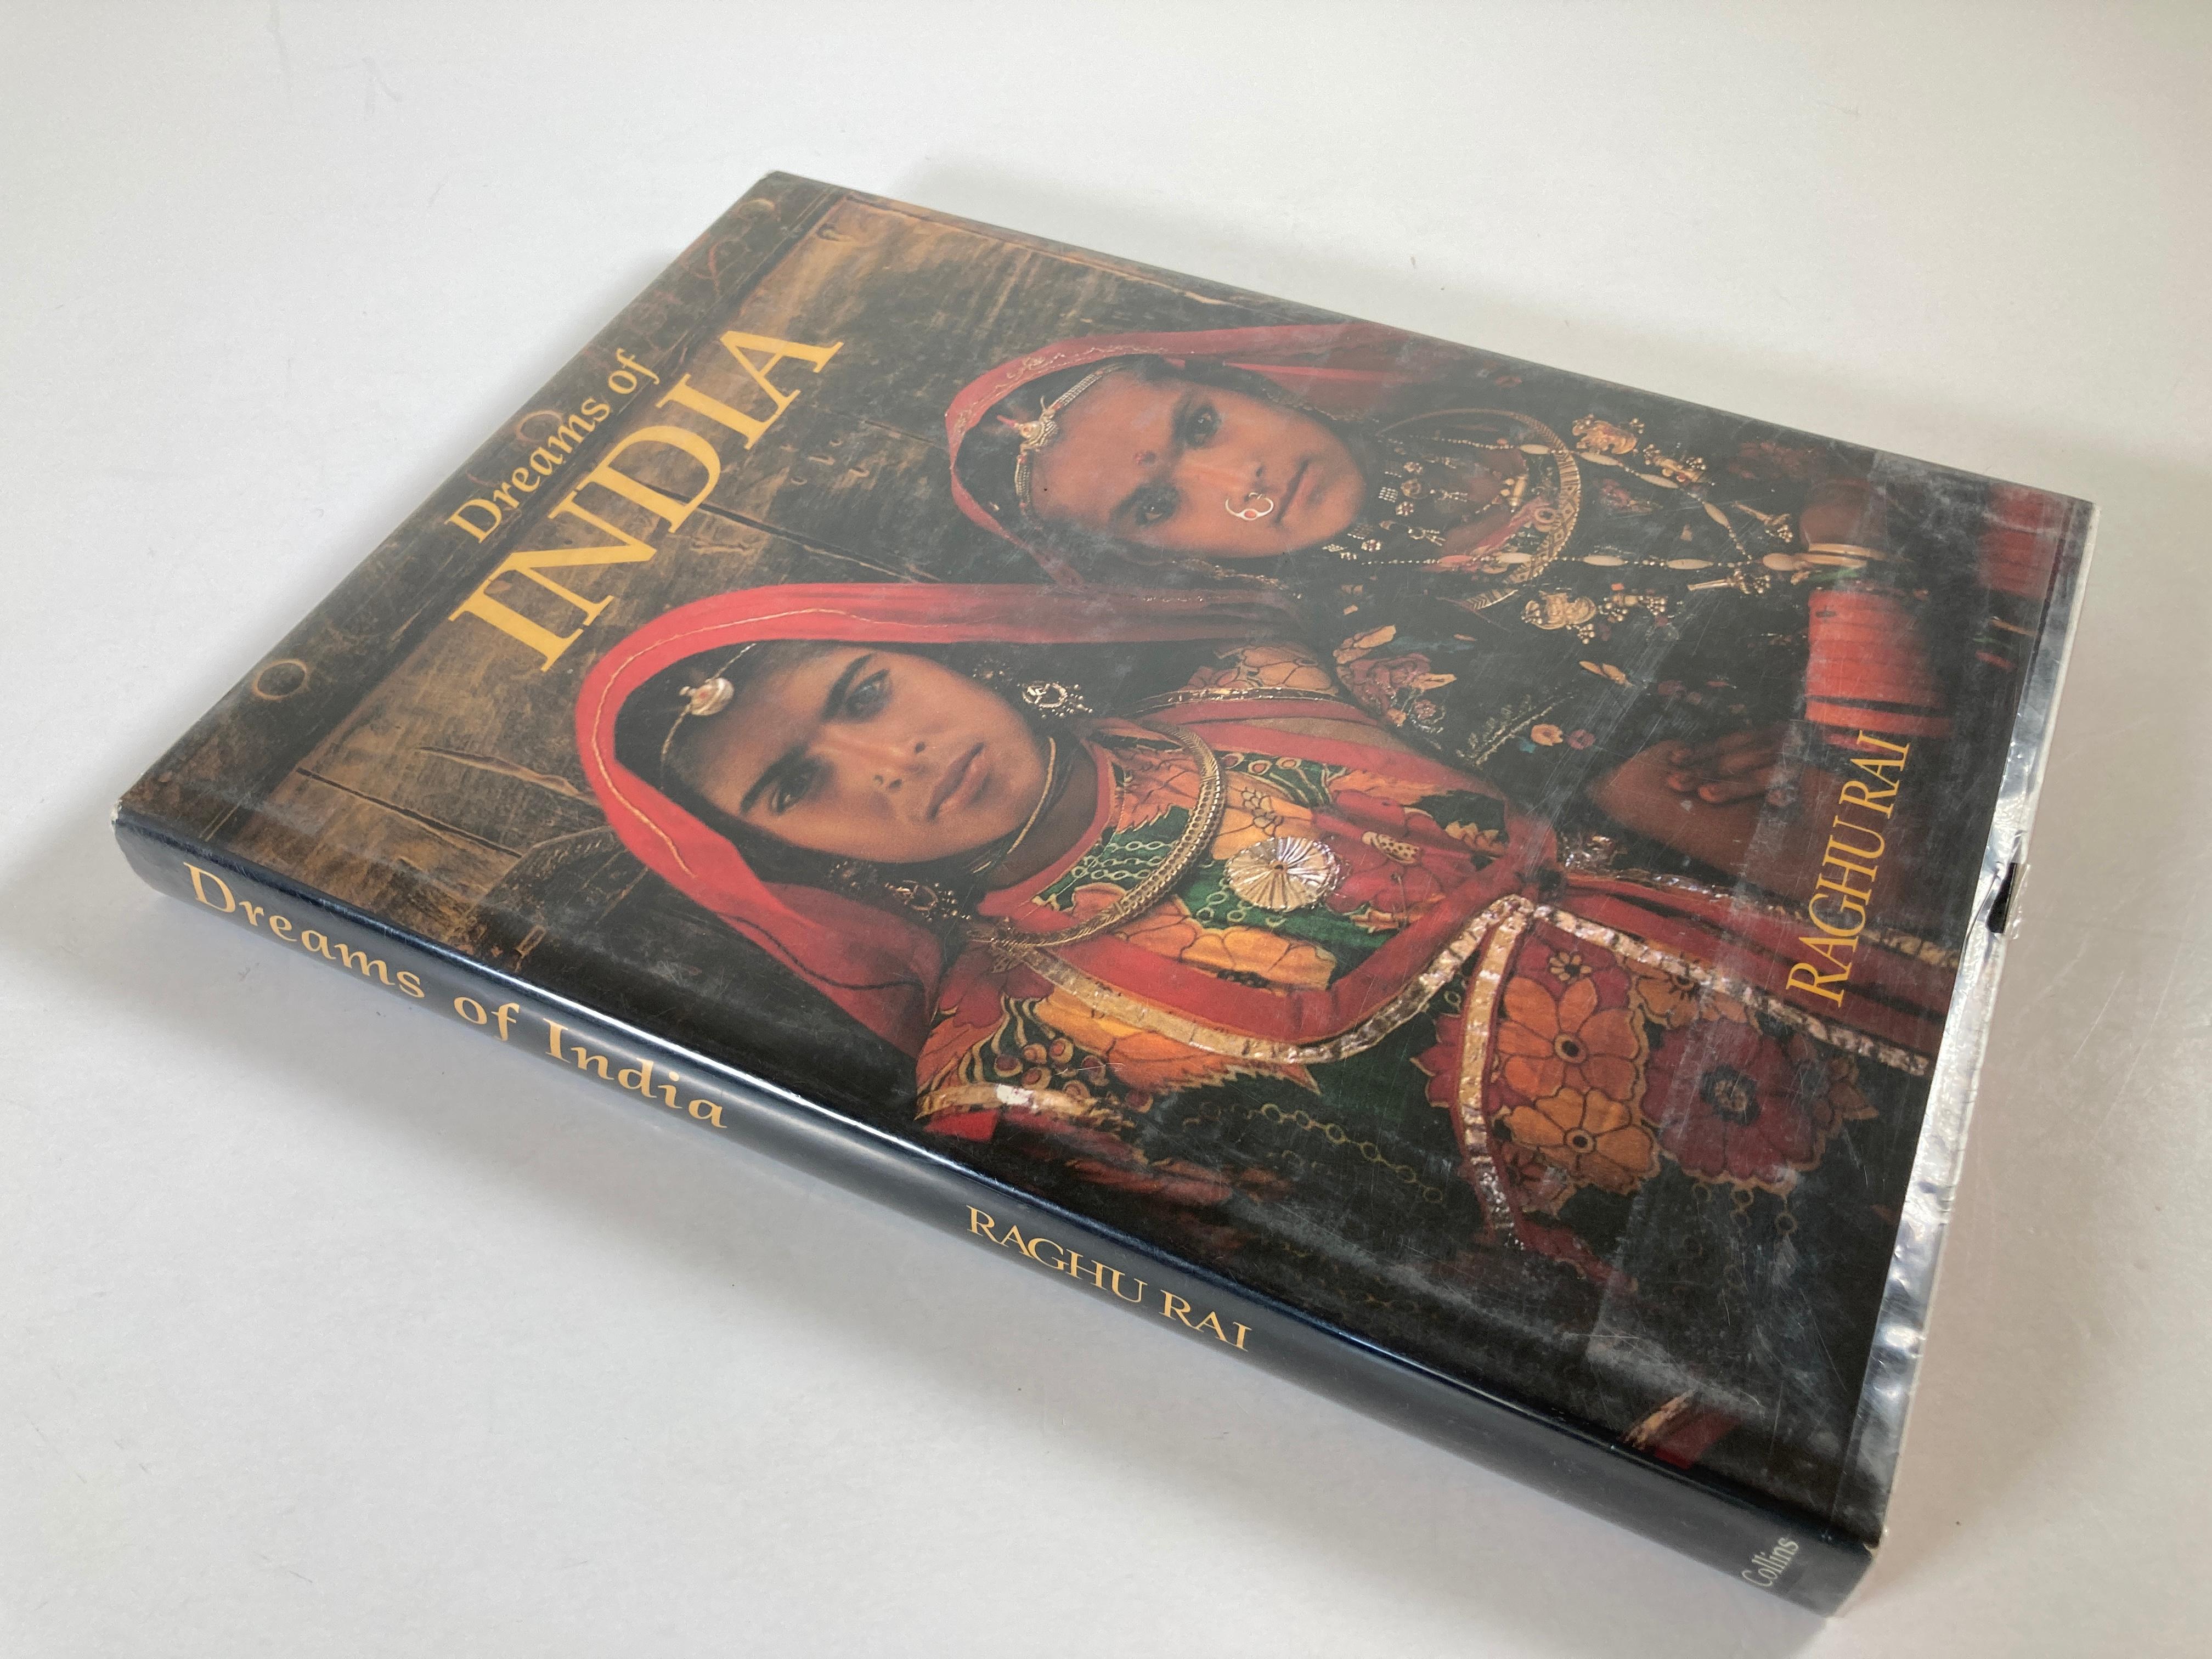 Raghu Rai
Collins, 1988 - Photography - 191 pages
0 Reviews
Internationally renowned Indian photographer Raghu Rai culminates more than 20 years of photographic excellence in Dreams of India. From the majestic Taj Mahal to rural earthen villages,